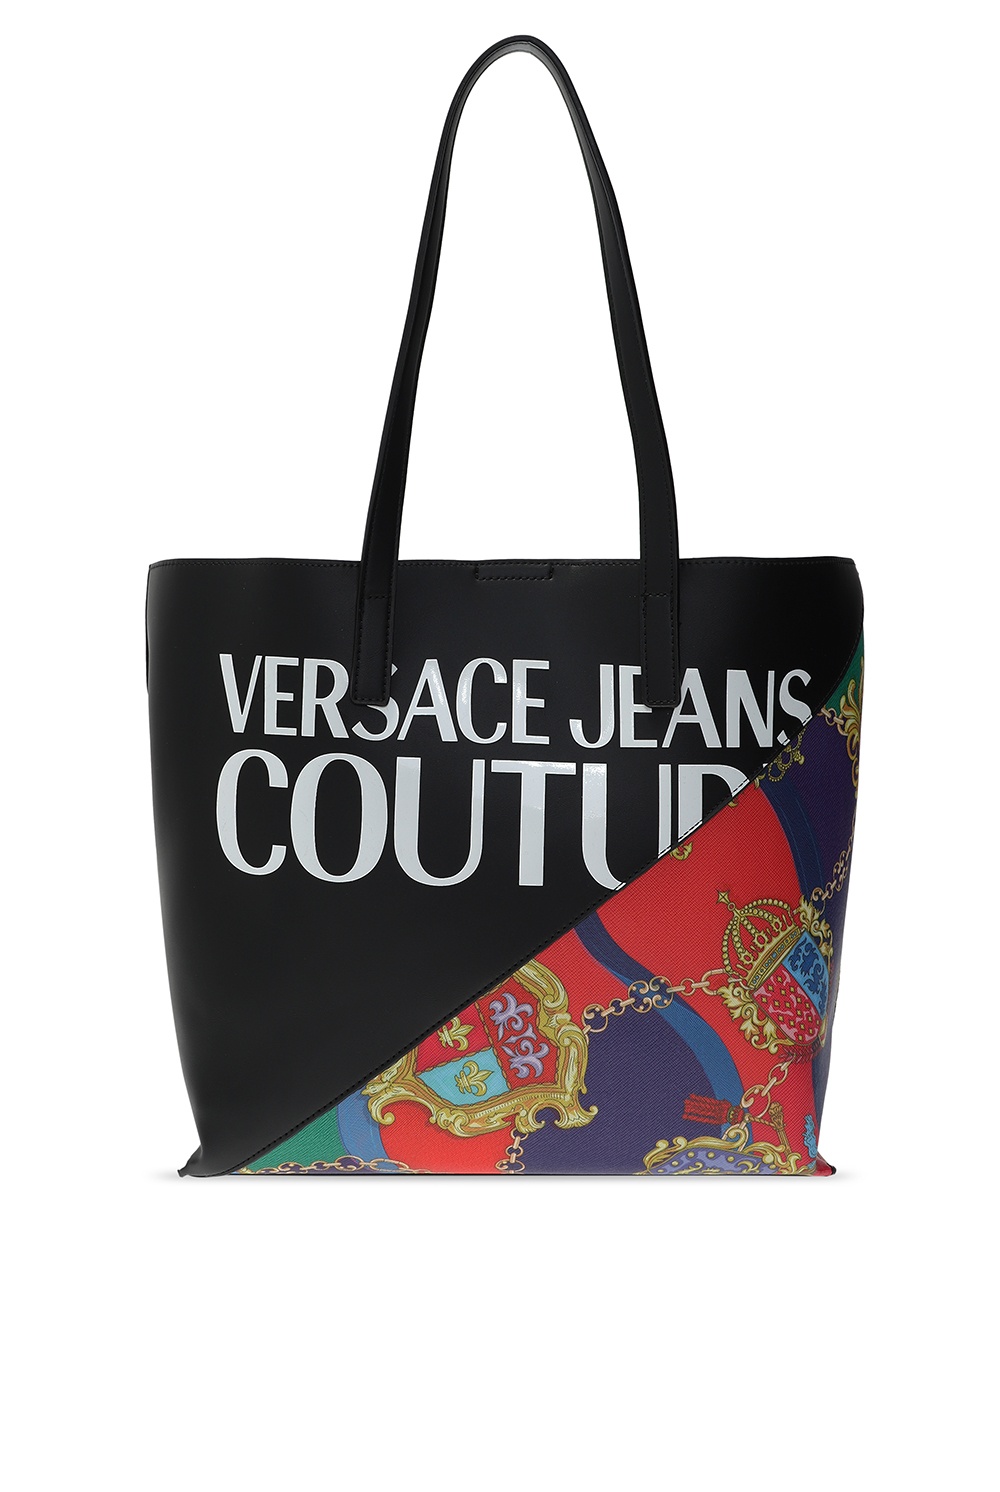 Versace Jeans Couture Logo Tote Bag